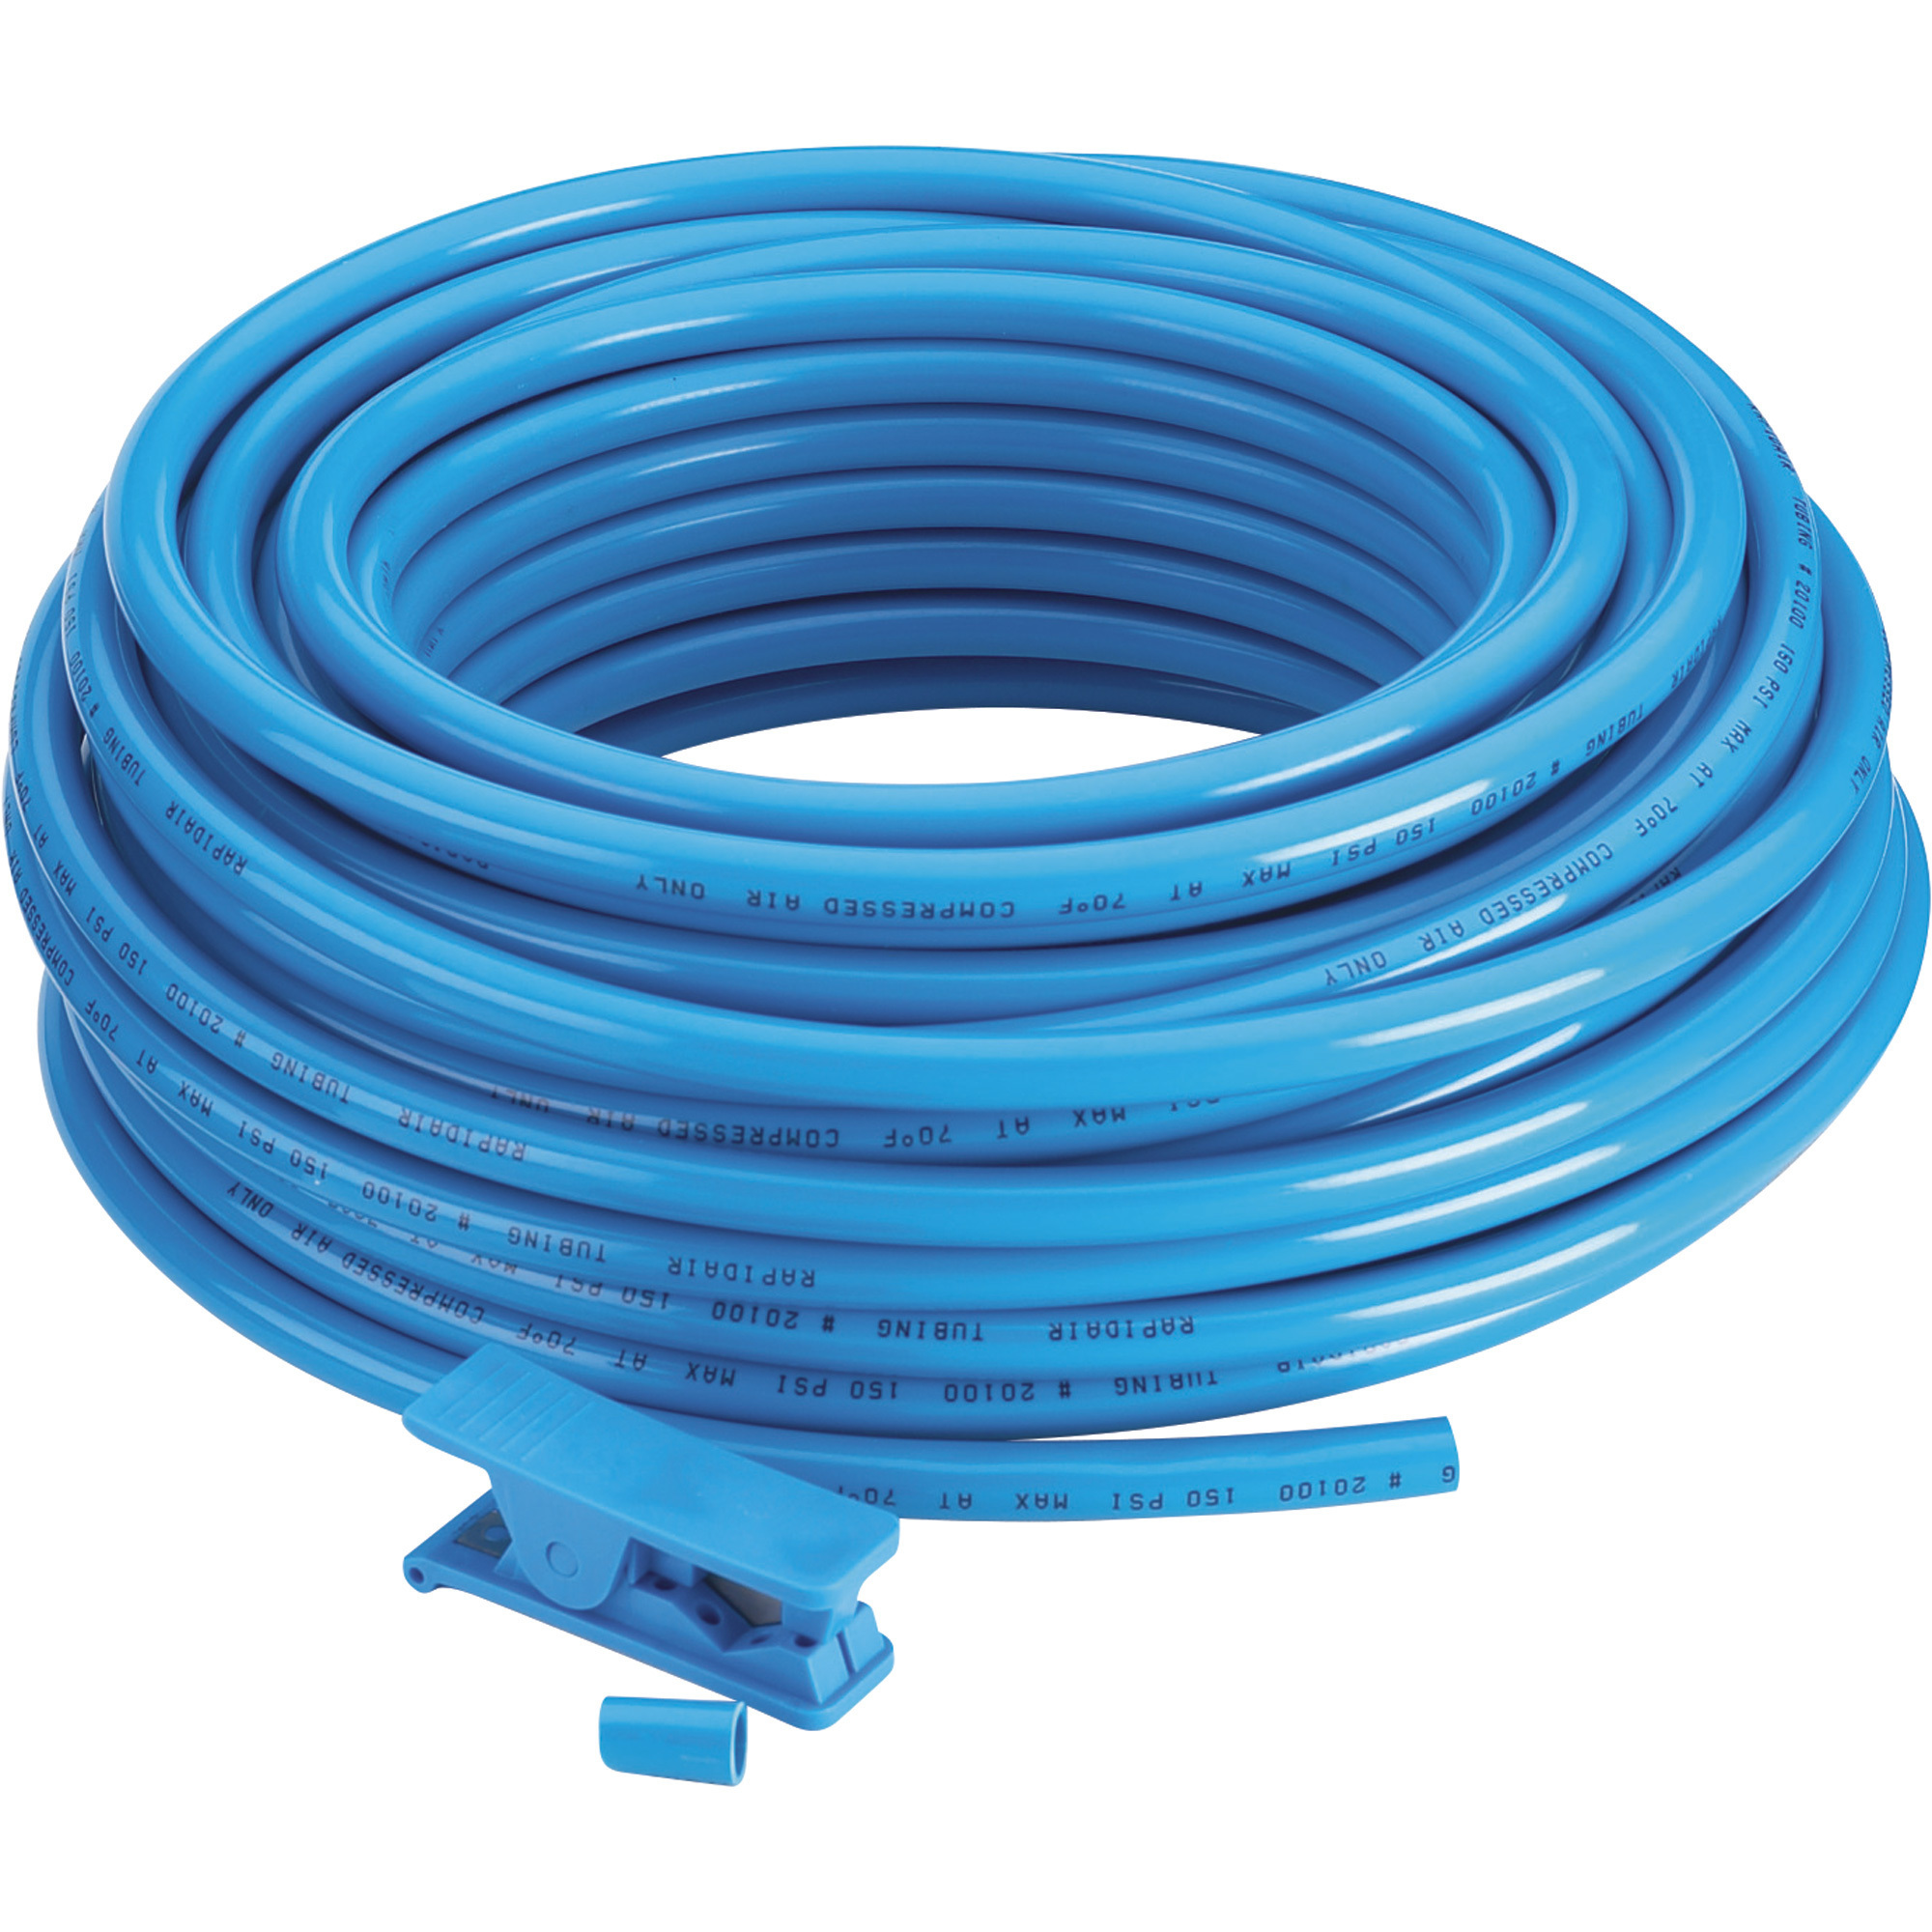 RapidAir 1/2Inch Nylon Compressed Air Piping Tubing, 100ft., Model 20100